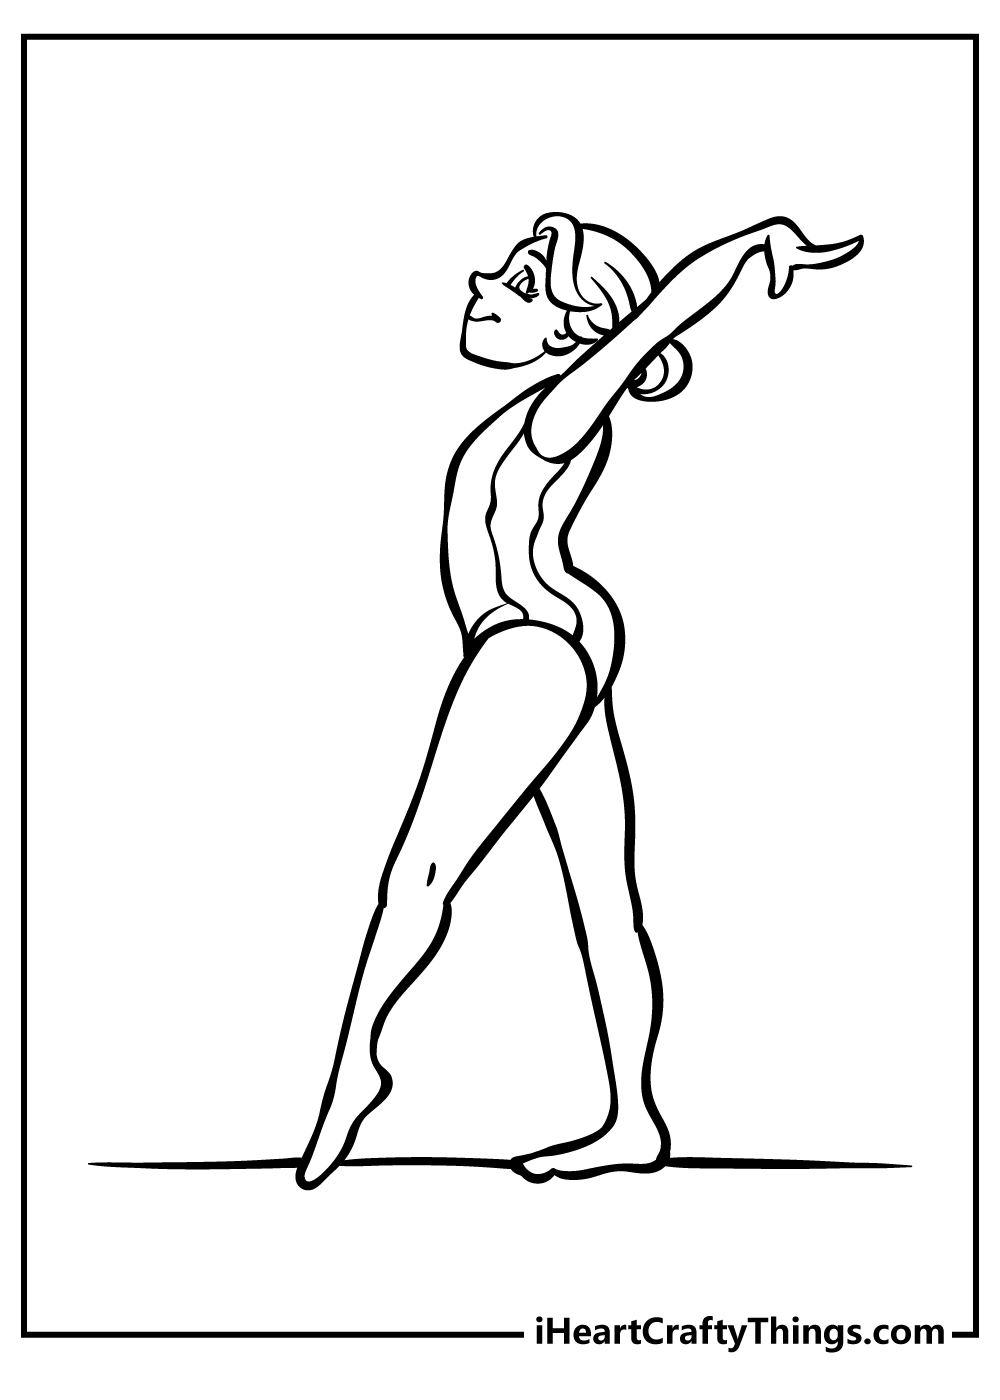 Gymnastics Coloring Pages free pdf download